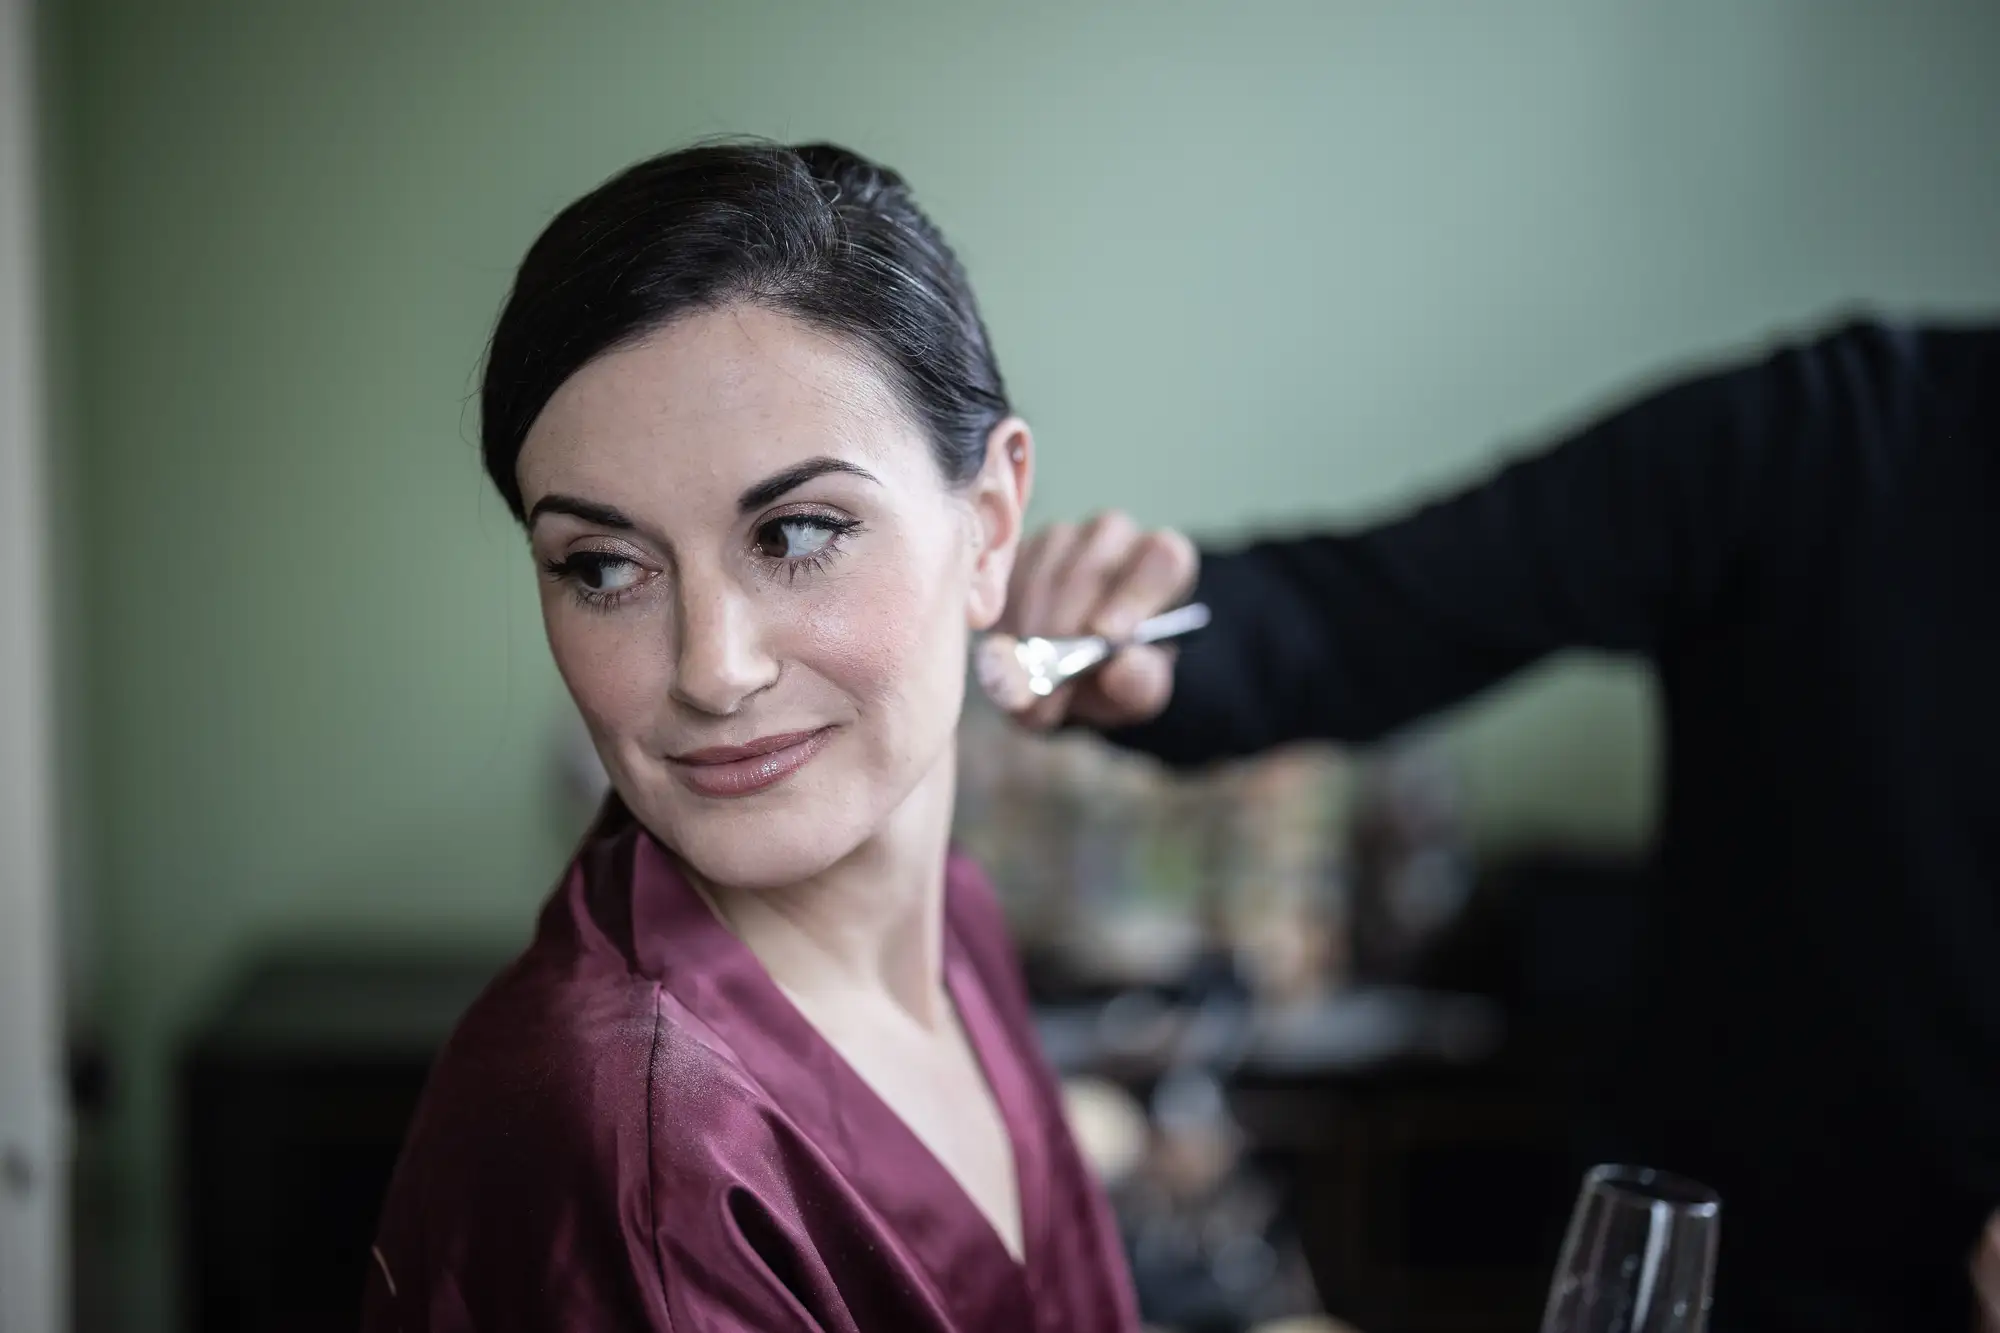 A woman in a maroon robe smiles as a makeup artist applies makeup to her face in a room with a green wall.